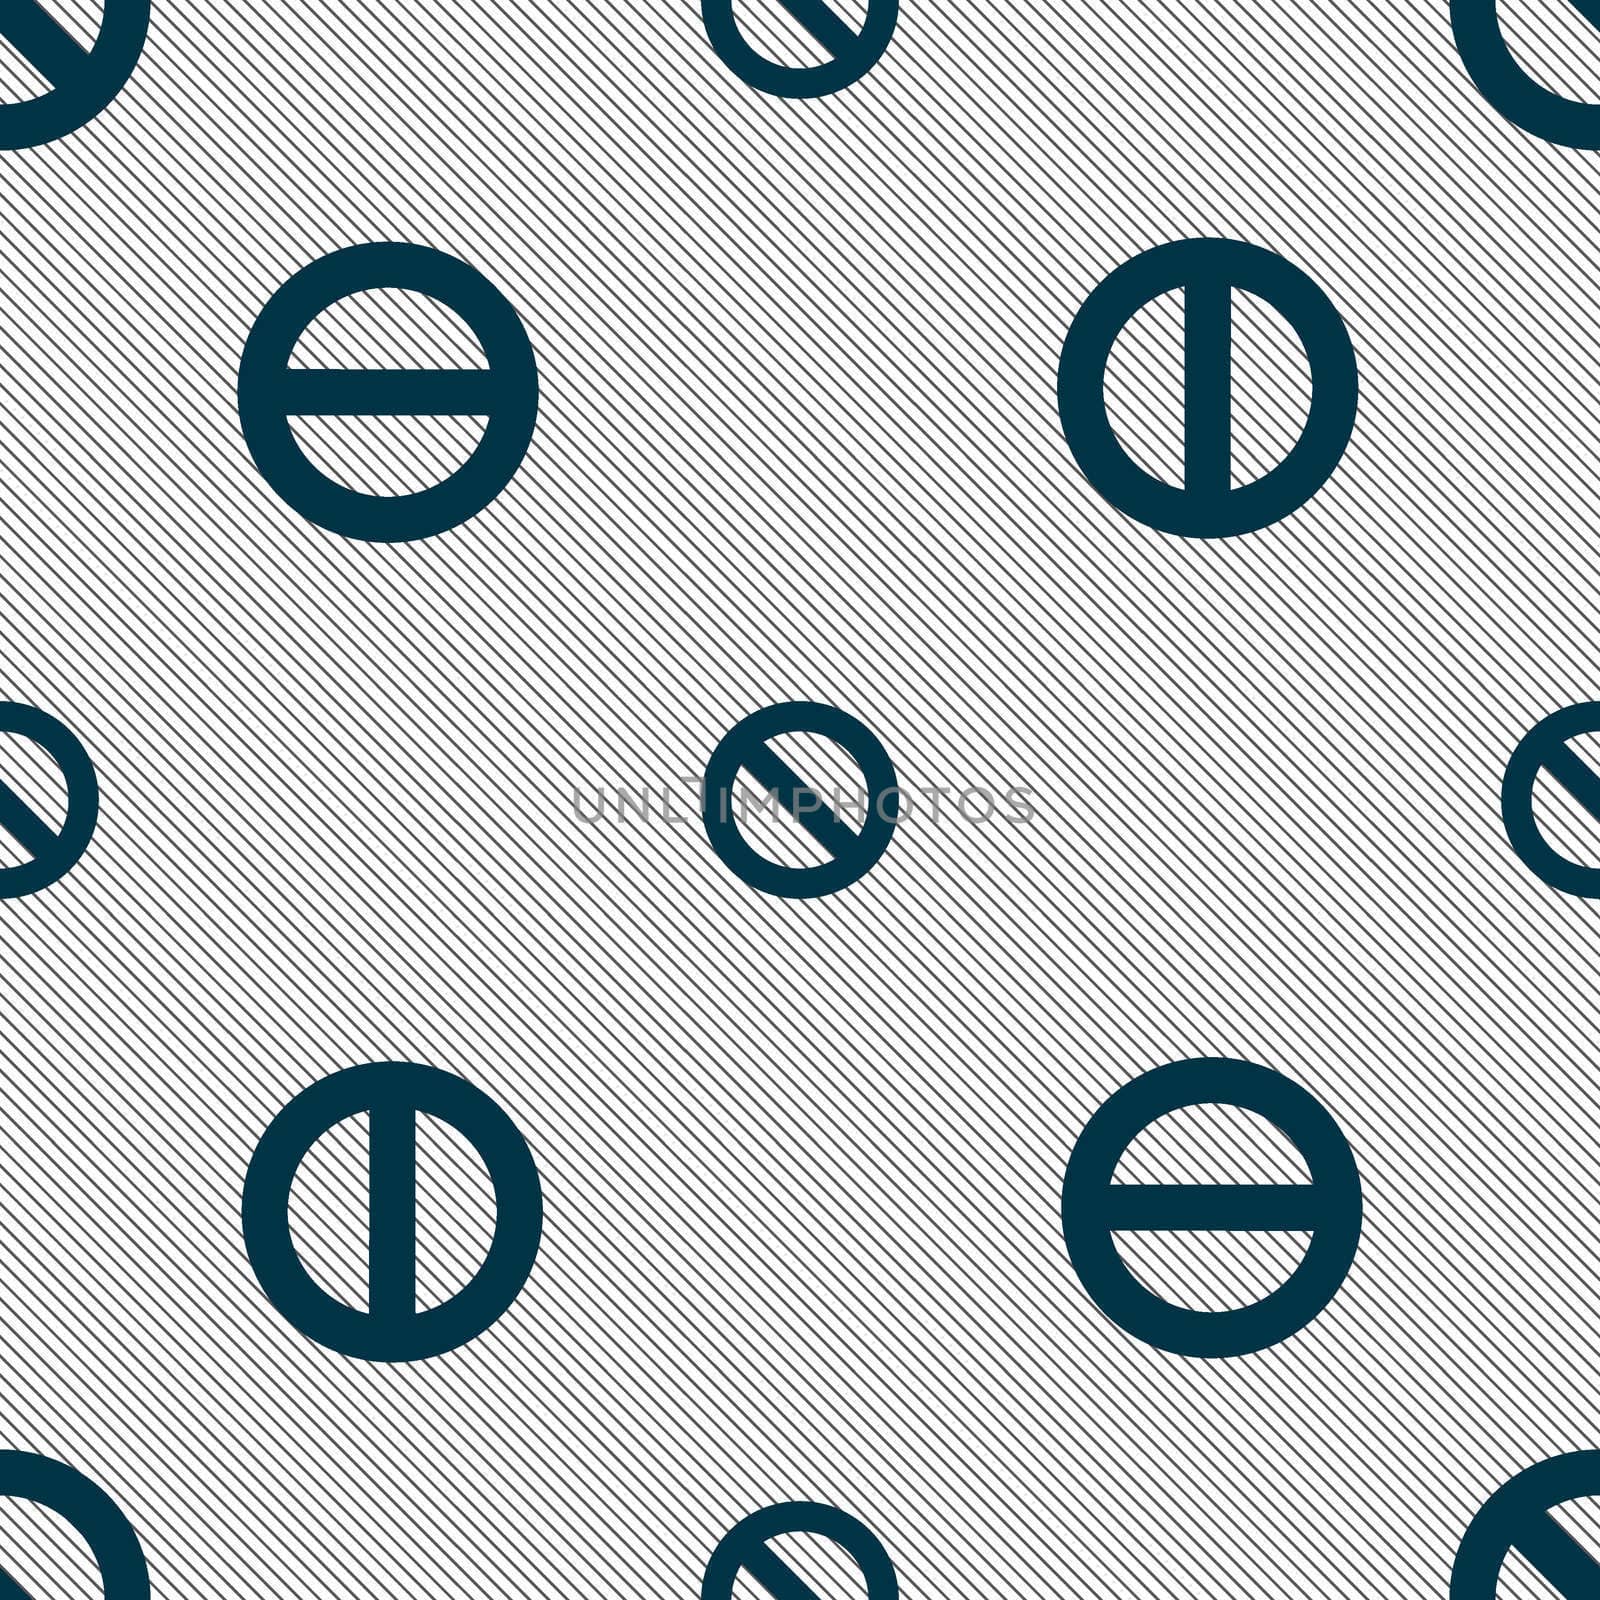 Stop sign icon. Prohibition symbol. No sign. Seamless pattern with geometric texture. illustration